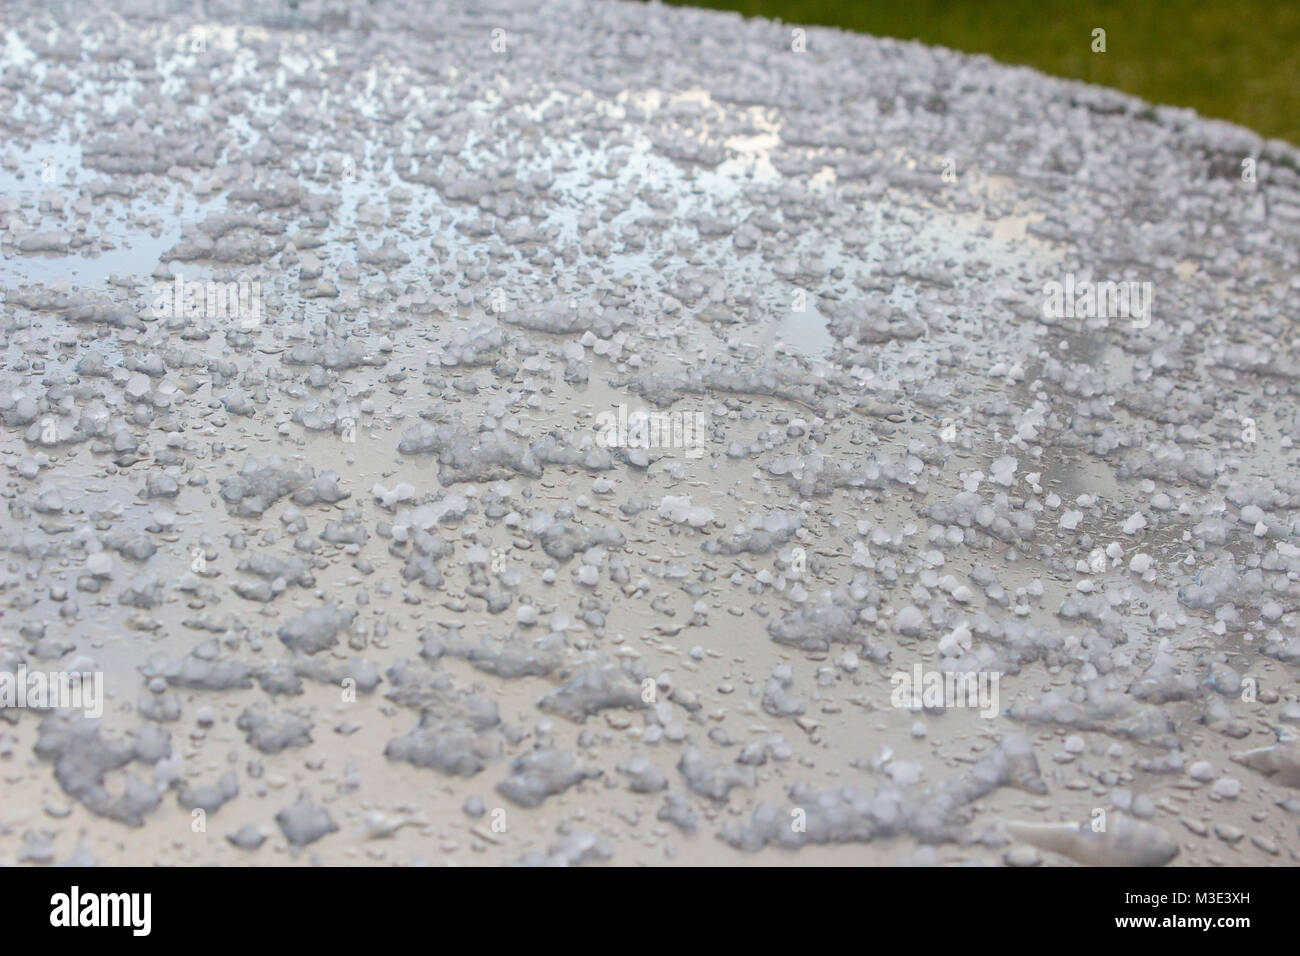 Frozen hailstones on a silver car roof following a cold winter shower Stock Photo